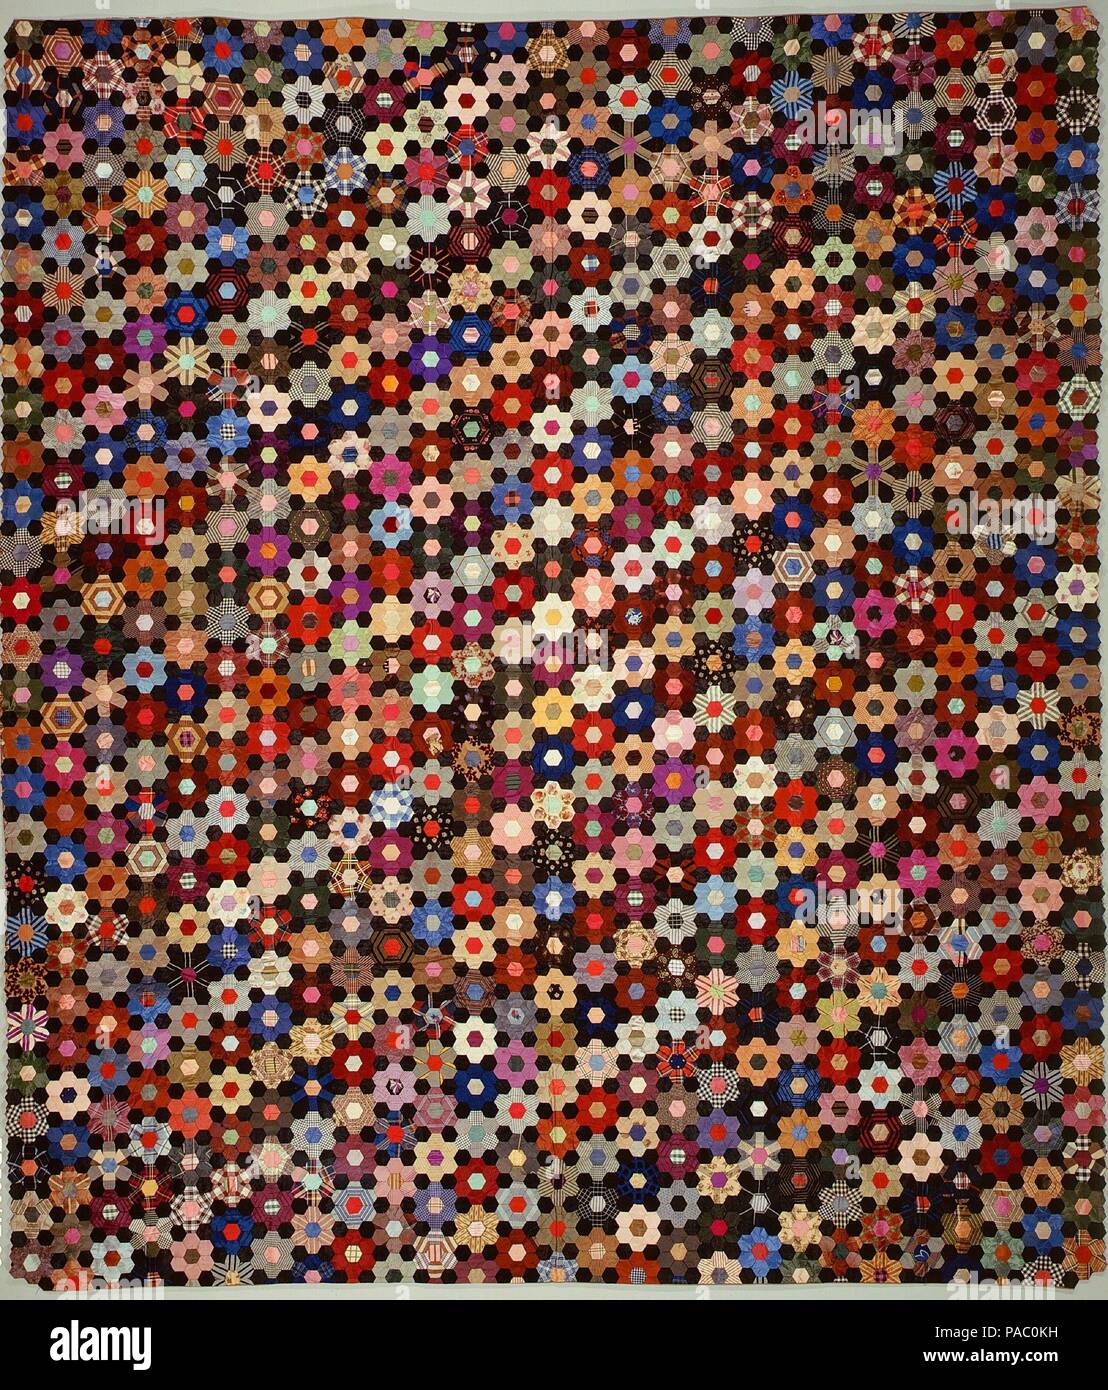 Quilt, Hexagon or mosaic pattern. Culture: American. Dimensions: 87 x 75 1/2 in. (221 x 191.8 cm). Maker: Anne Record (born 1832). Date: begun 1864.  This pieced bed cover has a top composed of hexagons of multicolored silks, including cut velvets, plaids, prints, and brocades. Each colored rosette (made from sewn hexagons) is set off by six surrounding hexagons of plain black silk. The bed cover is unquilted; the batting is attached to the top with an inner layer of brown printed-silk chiffon through which long zigzag running stitches are sewn. The sides are turned under and sewn together. La Stock Photo